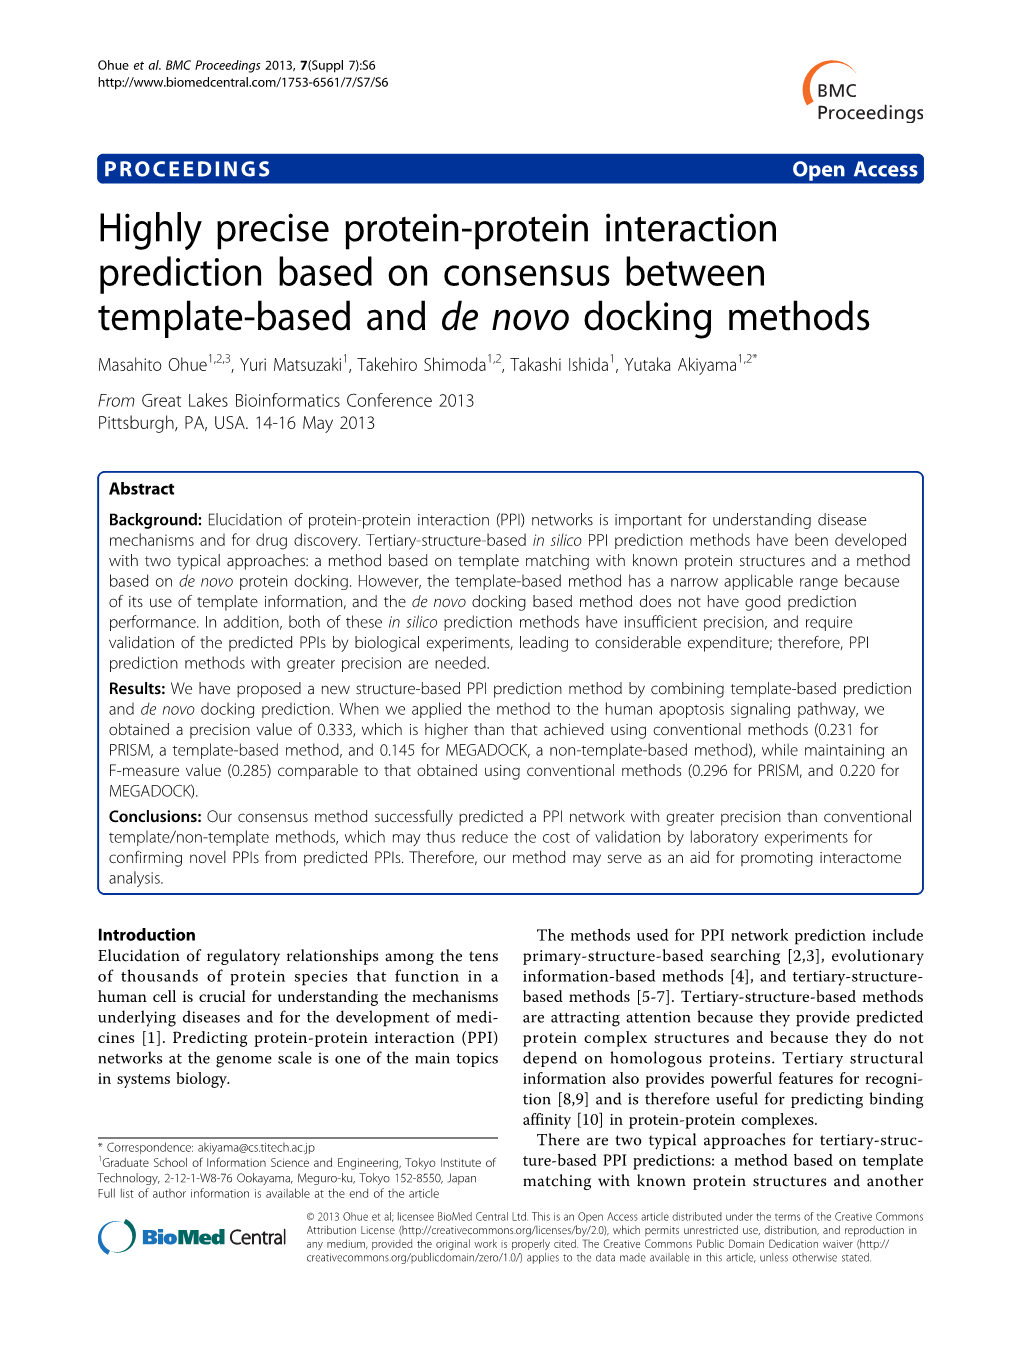 Highly Precise Protein-Protein Interaction Prediction Based On